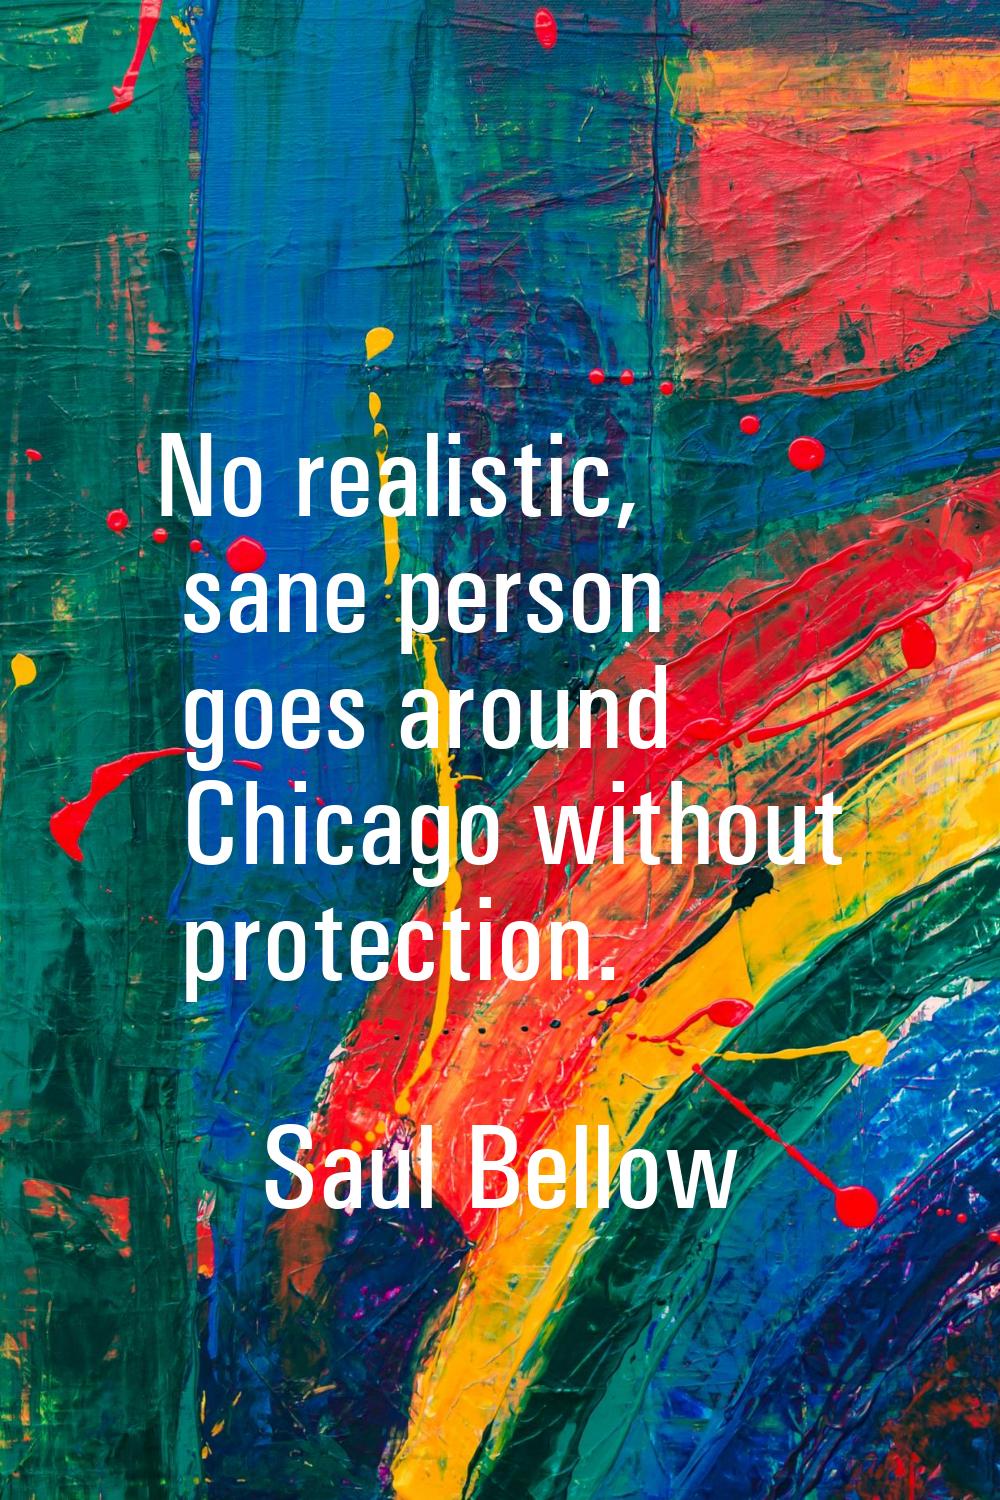 No realistic, sane person goes around Chicago without protection.